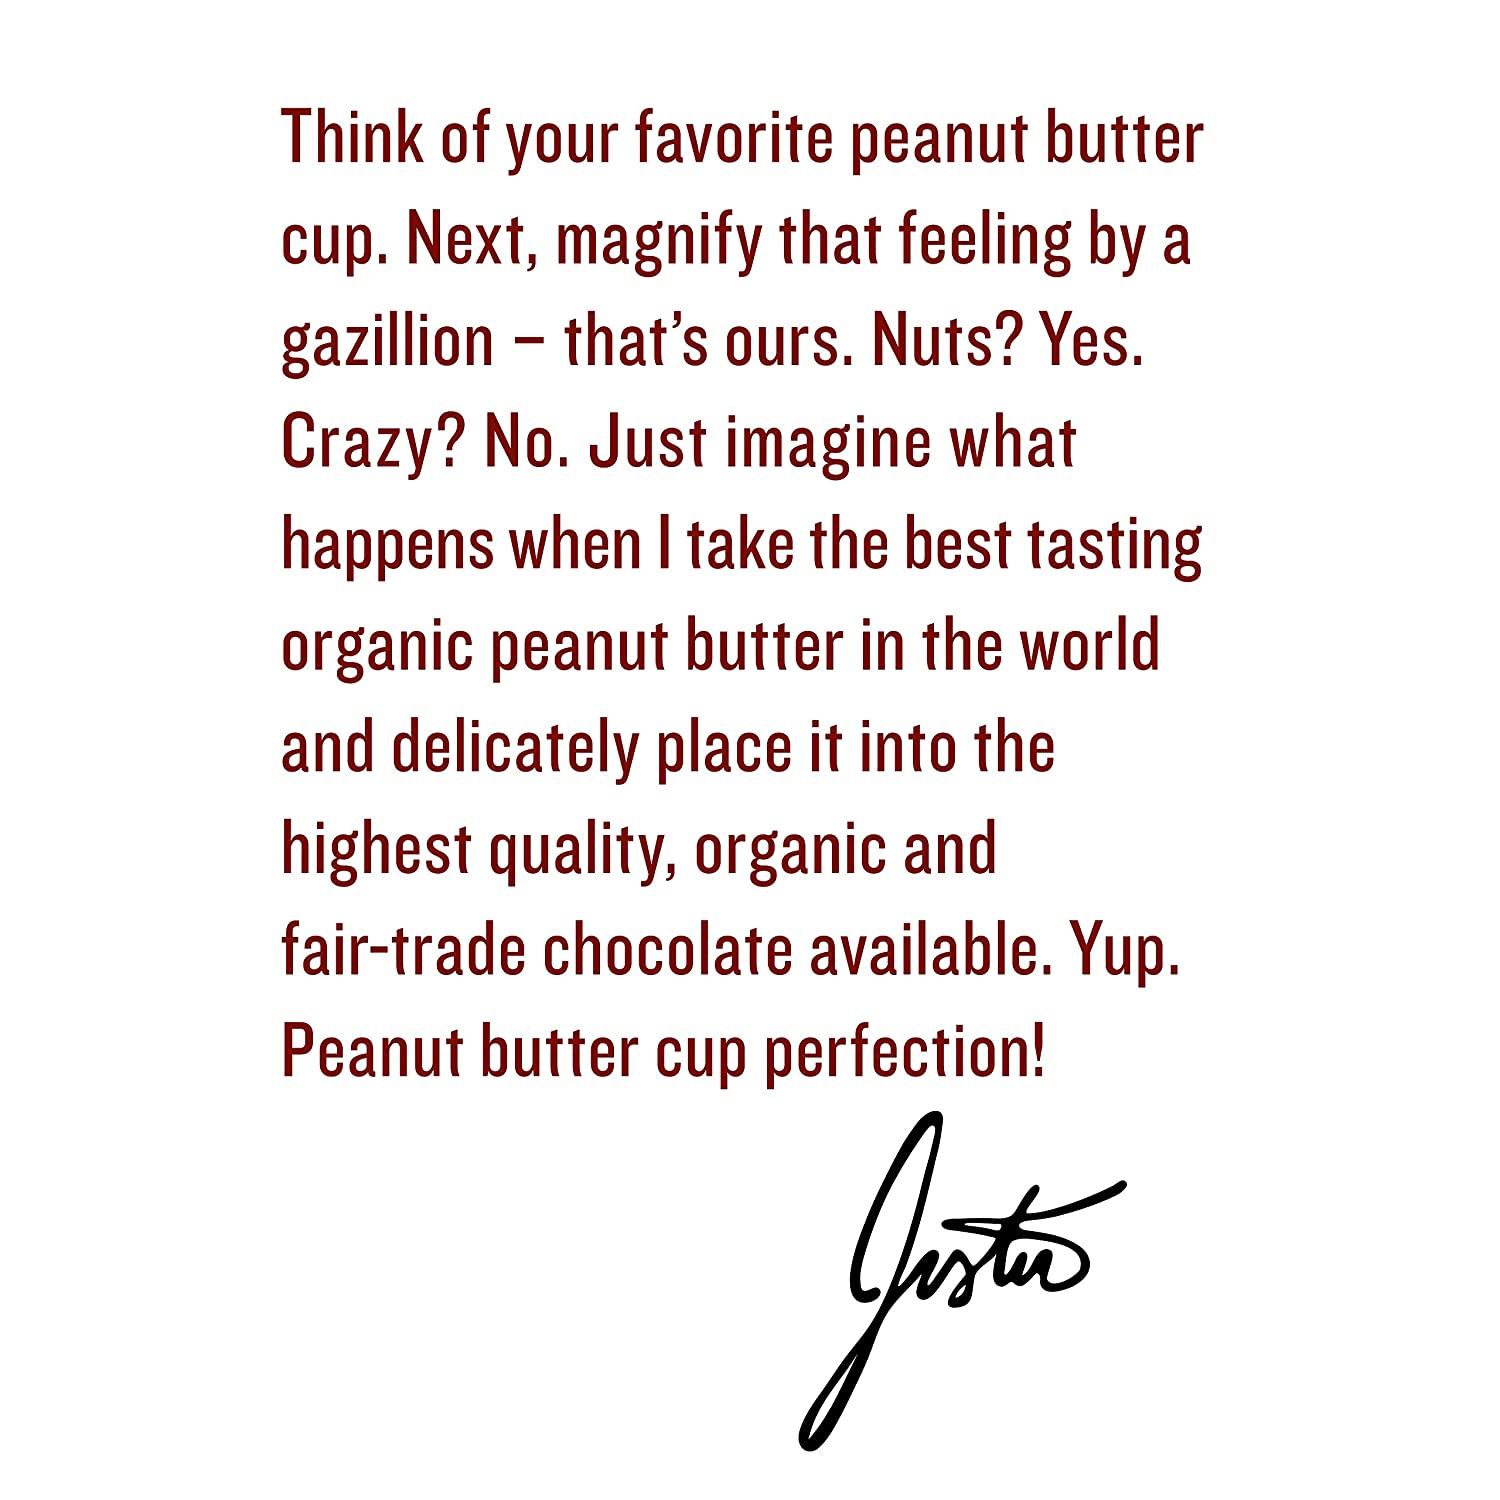 Justins's Organic Crispy Dark Chocolate Peanut Butter Cups, Rainforest Alliance Certified Cocoa, Gluten-Free, Responsibly Sourced, 12 Pack (2 Cups